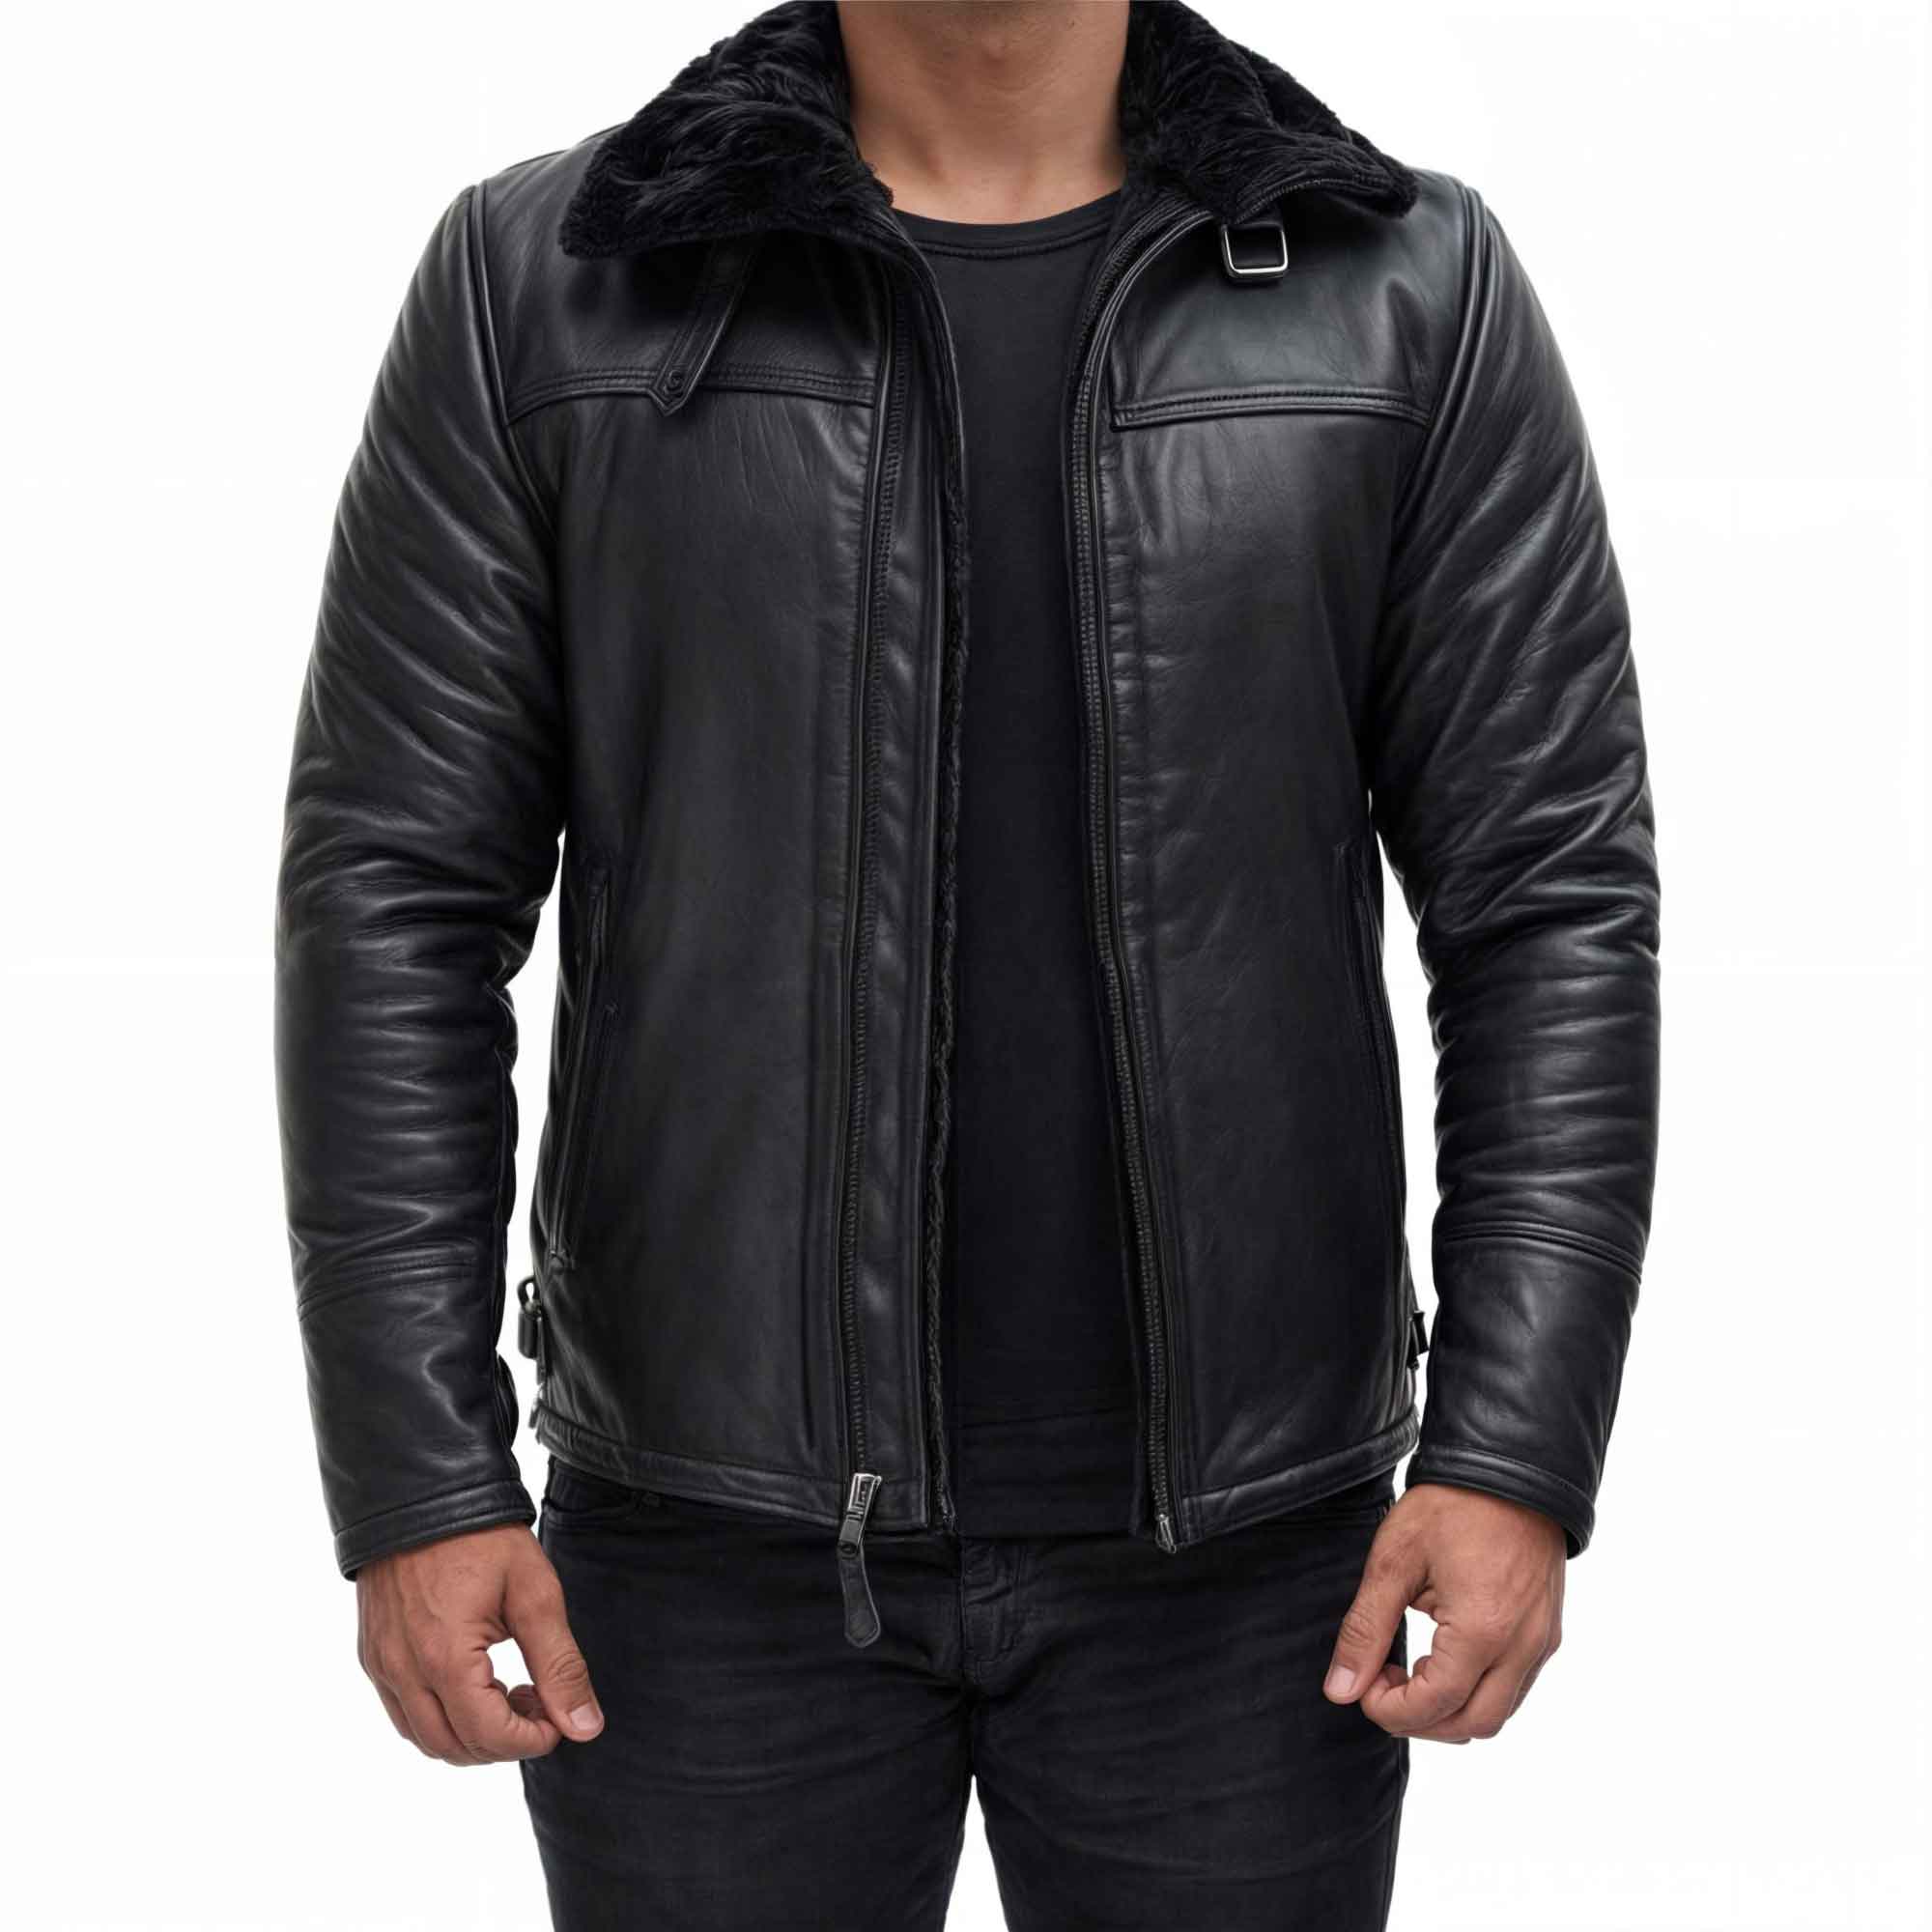 A man wearing a black leather jacket with fur collar, featuring zippered pockets, a hood, and a shearling collar.